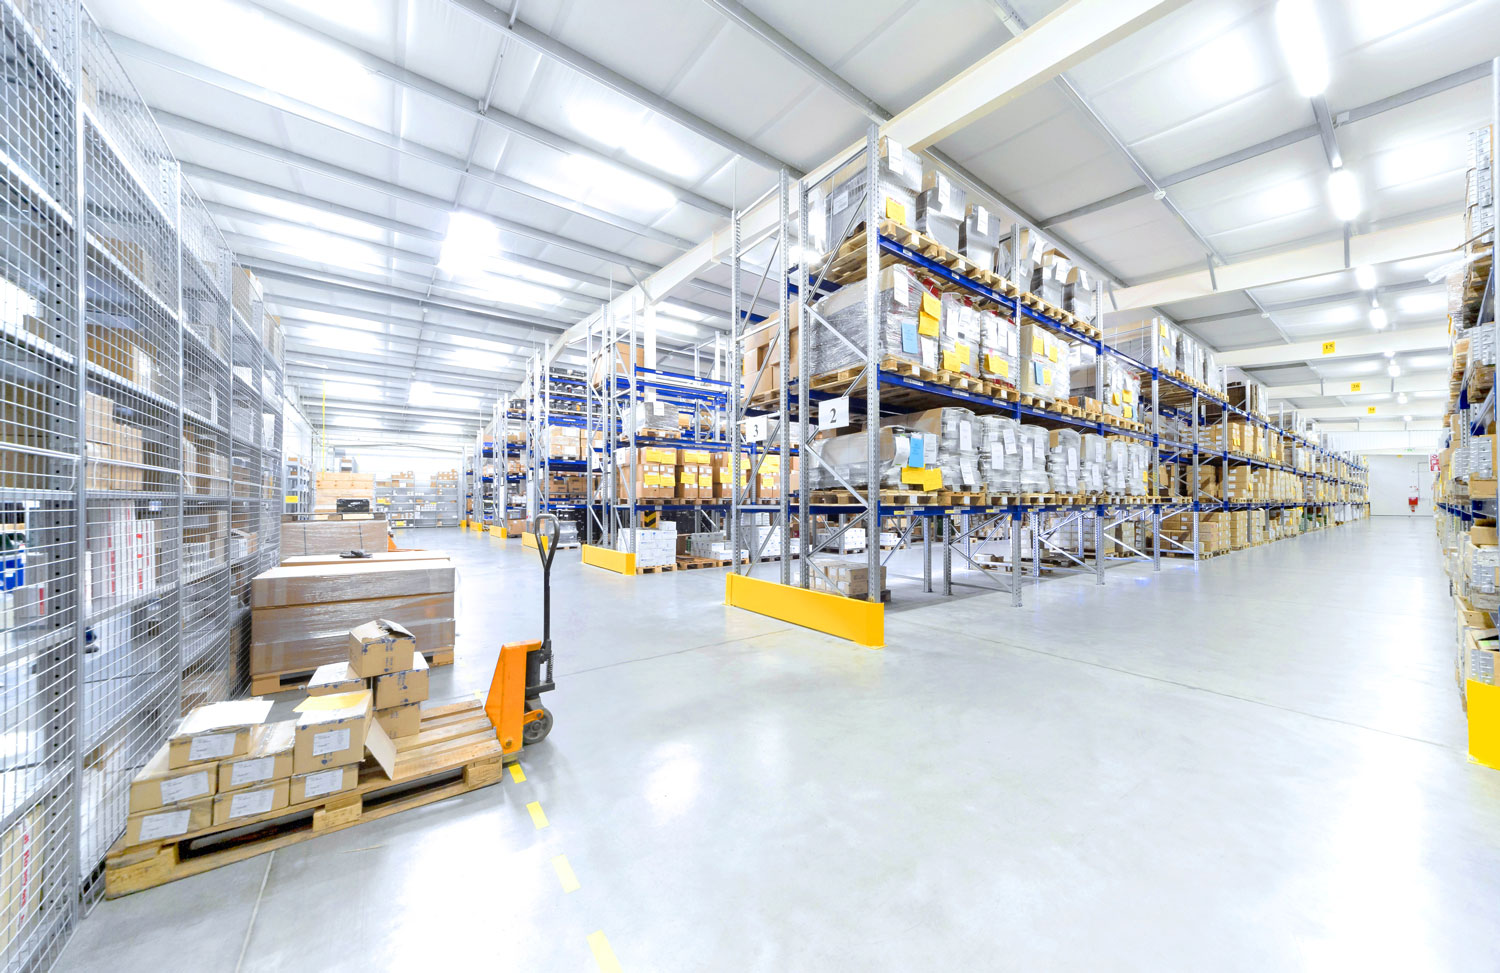 Opening a New Warehouse? Consider These 5 Questions to Pick the Best Location